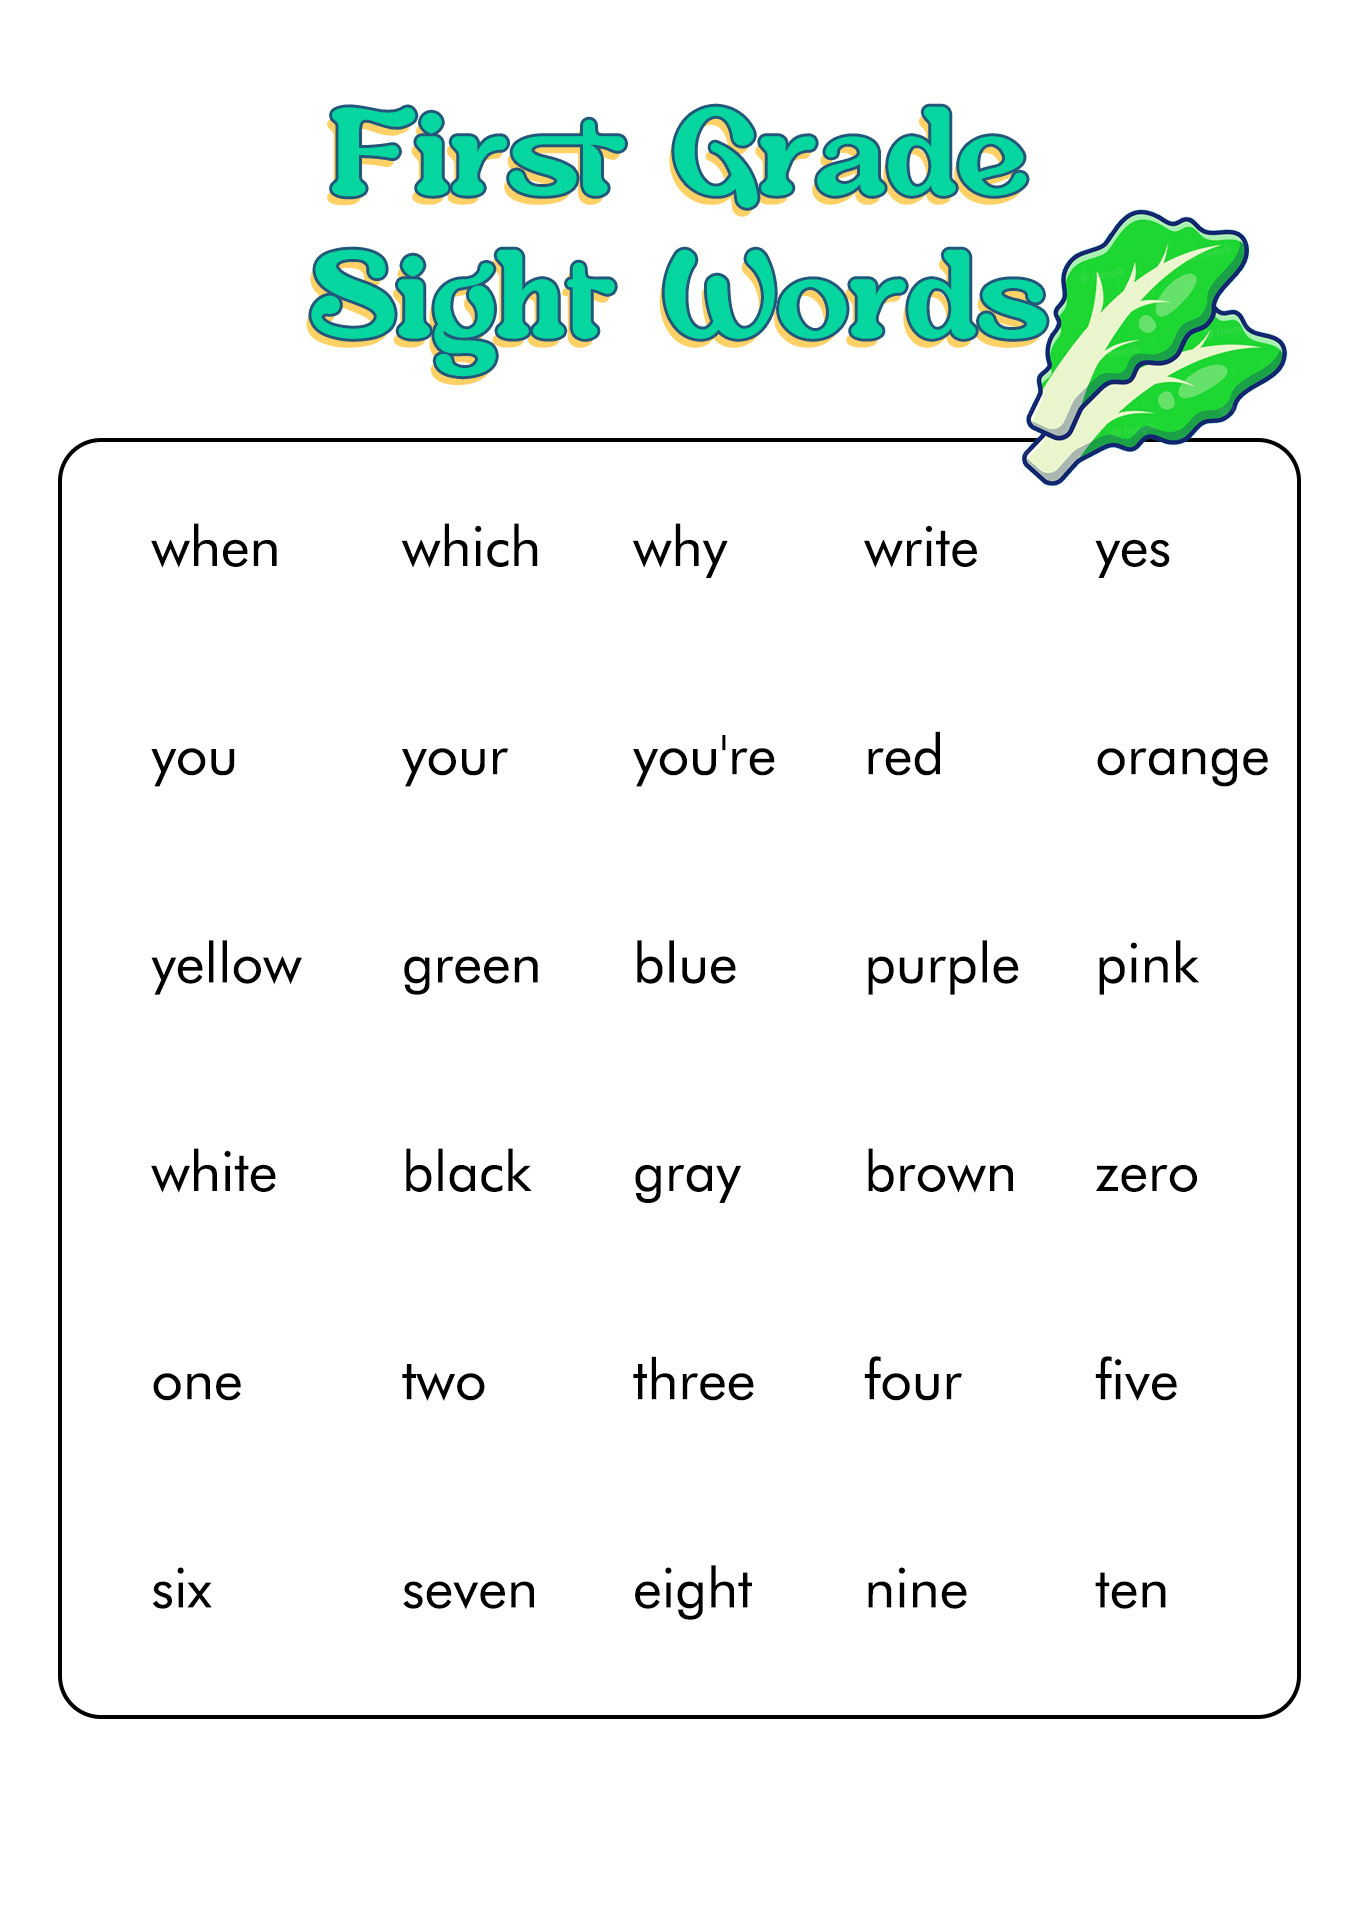 First Grade Sight Words Printable Image